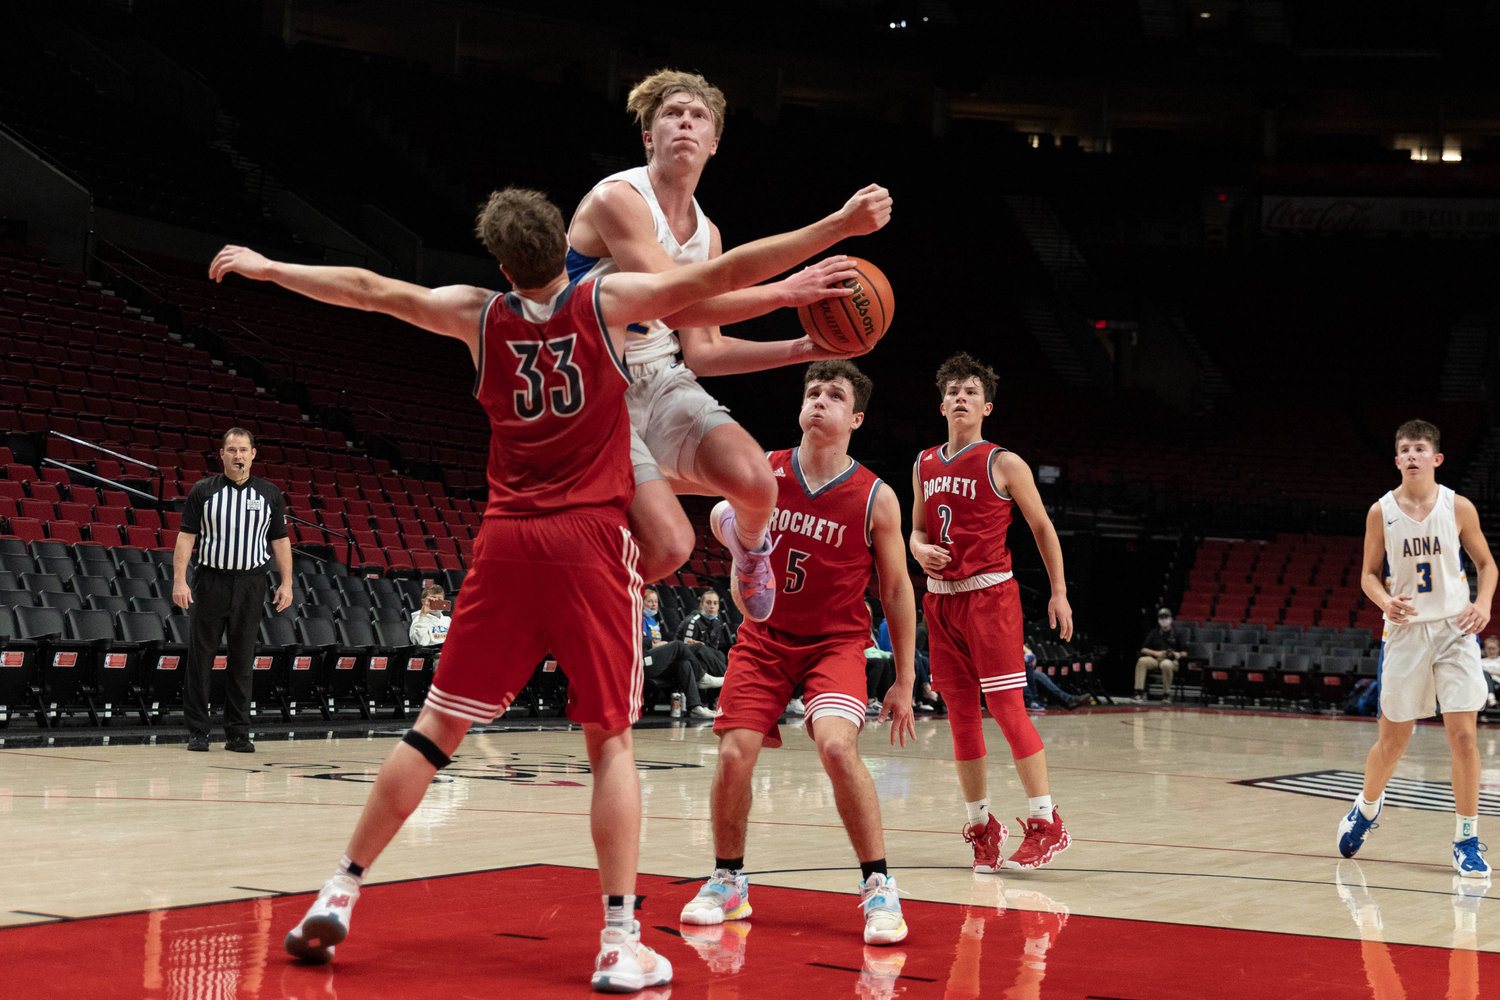 Adna forward Lane Johnson drives to the hoop against Castle Rock at the Moda Center in Portland Dec. 18.